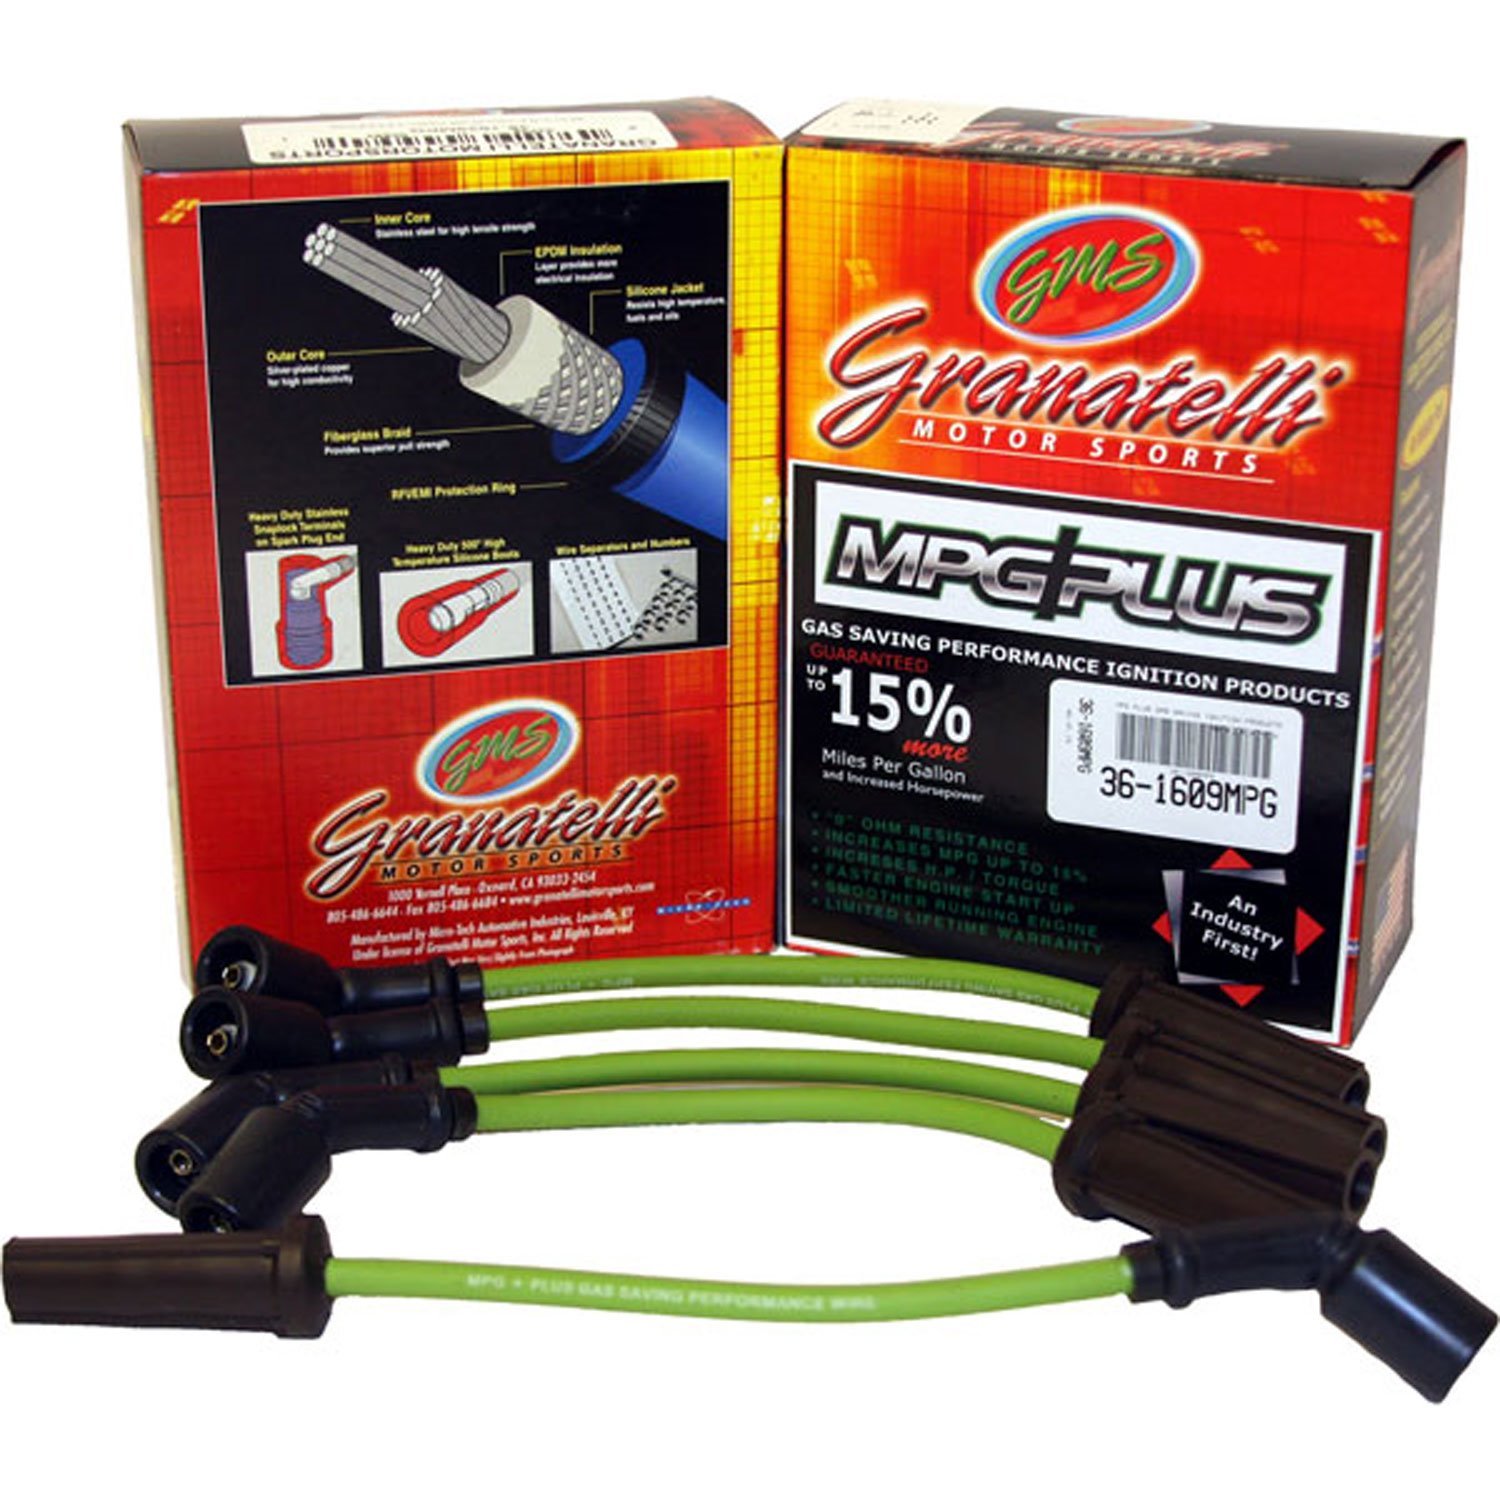 MPG Wires SUBARU FORESTER 4CYL 2.5L 98-98